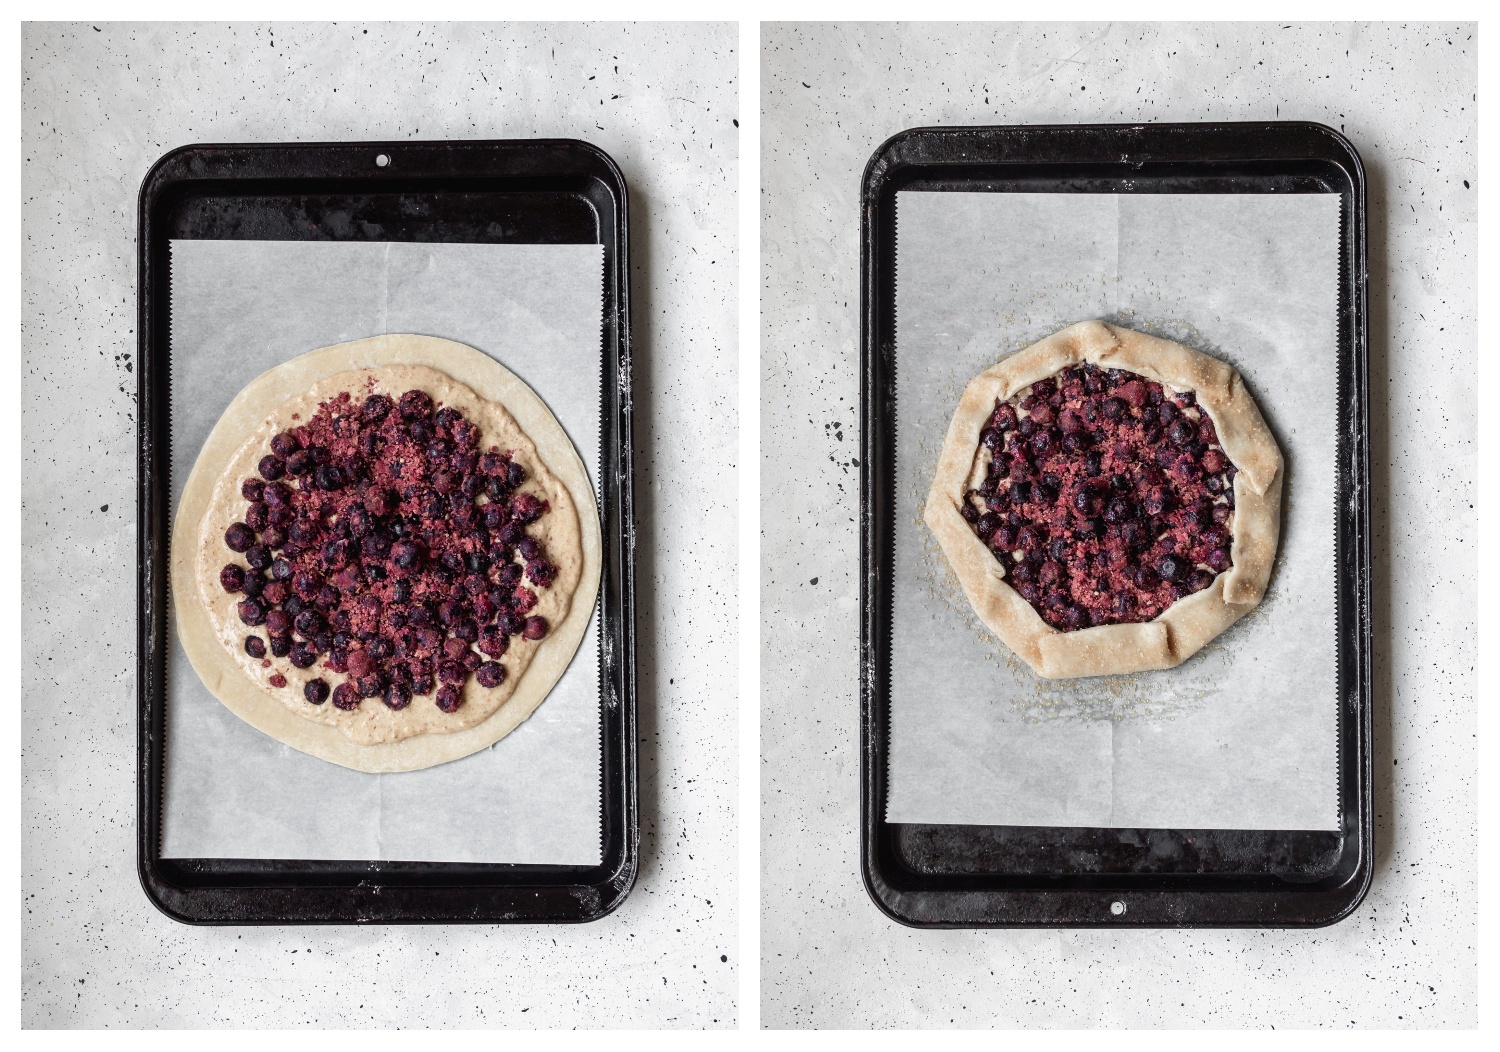 Two overhead shots of a blueberry galette on a sheet pan on a grey table. On the left, the galette is unfolded, on the right, the galette is folded.